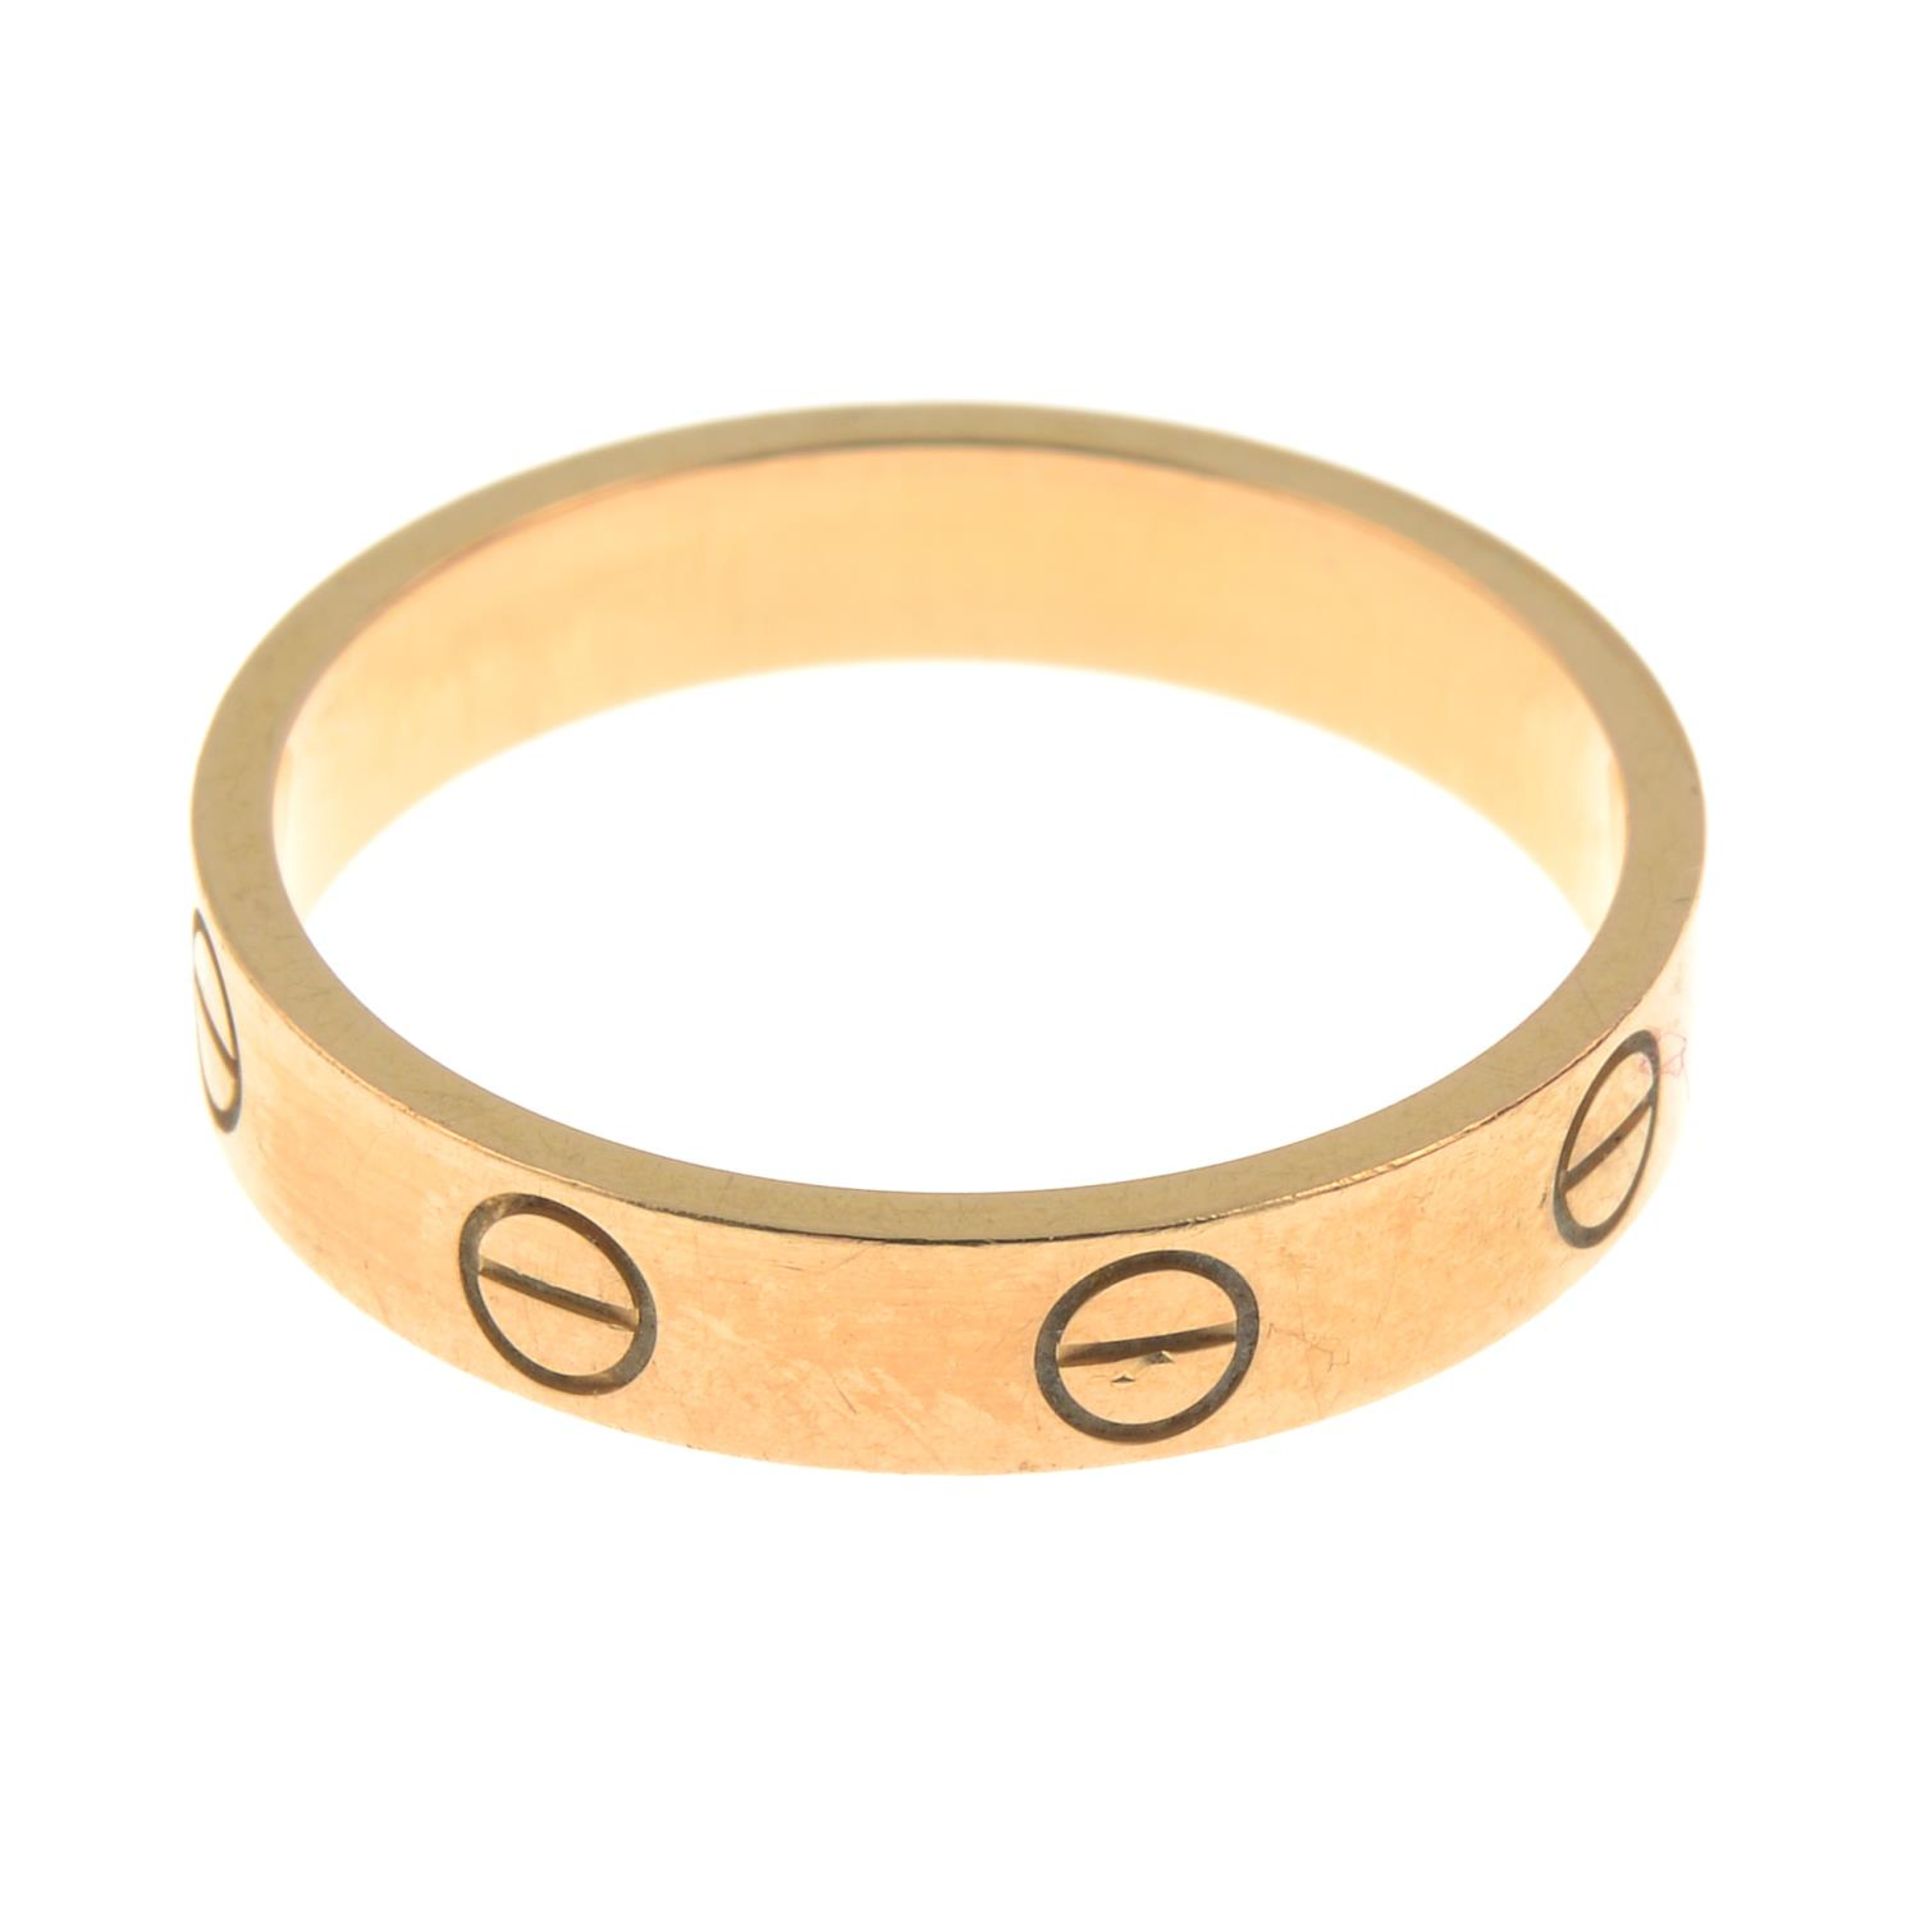 CARTIER - an 18ct gold 'Love' ring. - Image 3 of 4